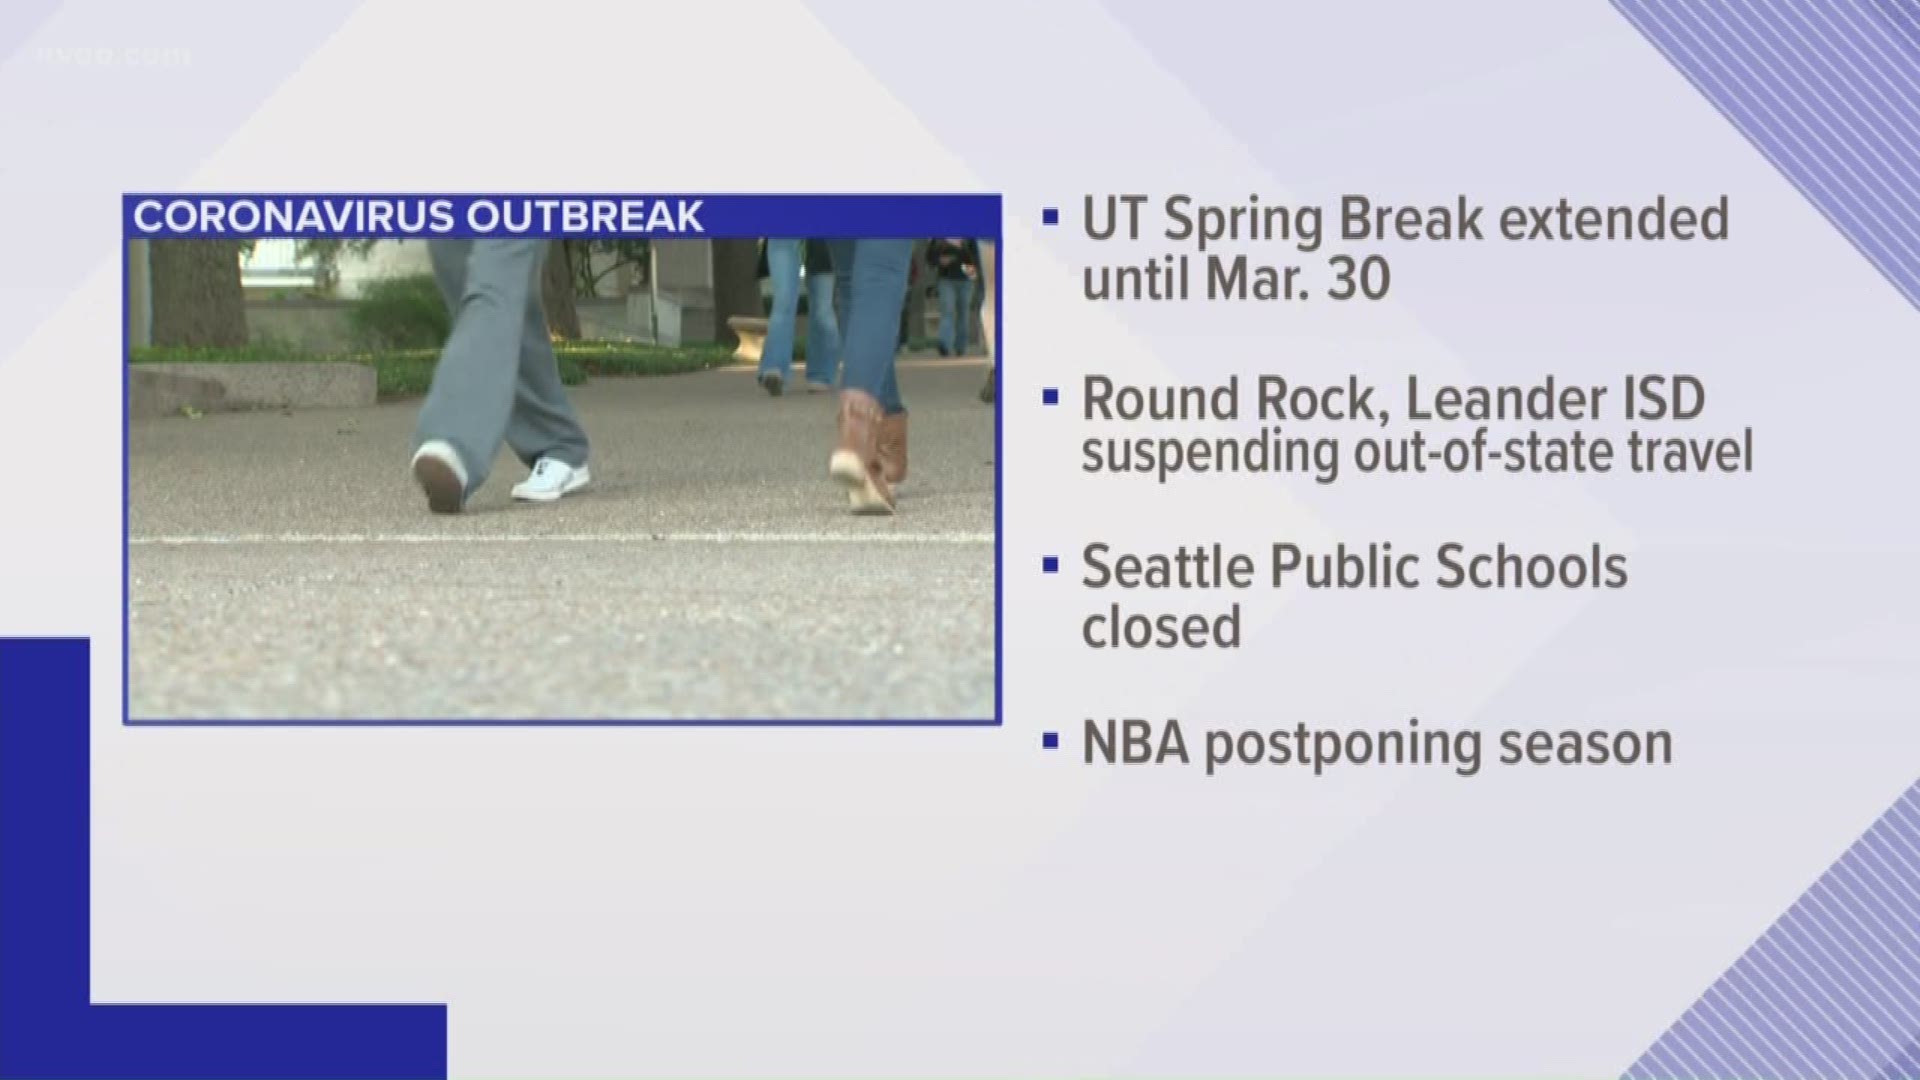 The University of Texas at Austin is extending its spring break. Classes won't resume until March 30, a week later than planned.